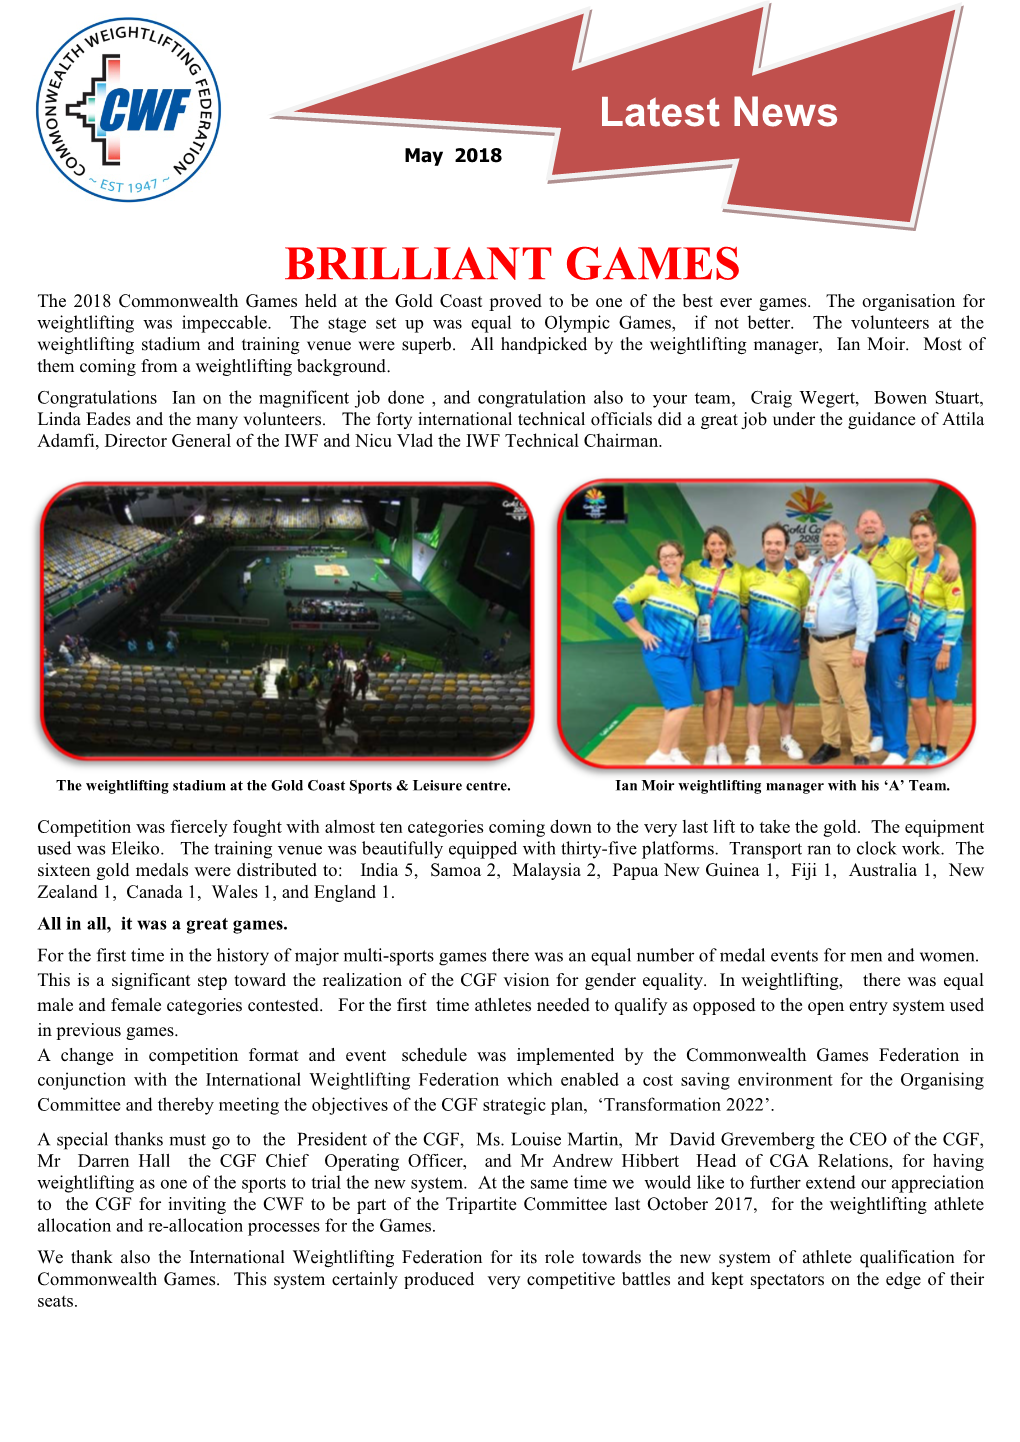 BRILLIANT GAMES the 2018 Commonwealth Games Held at the Gold Coast Proved to Be One of the Best Ever Games